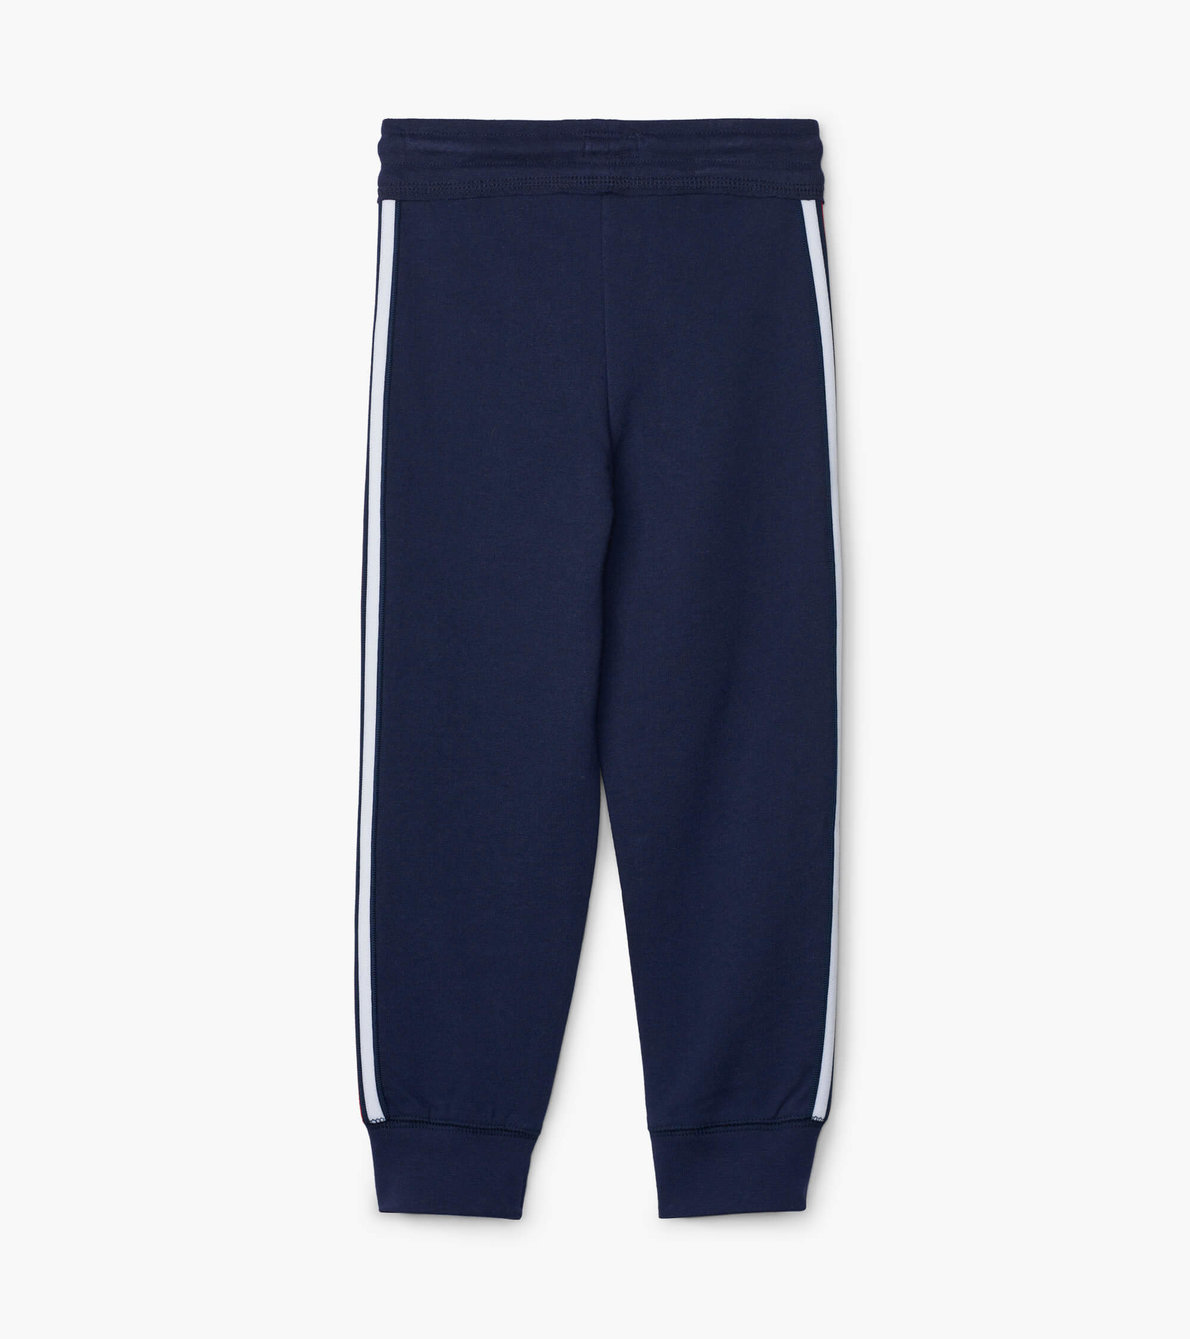 View larger image of Navy Side Stripe Joggers